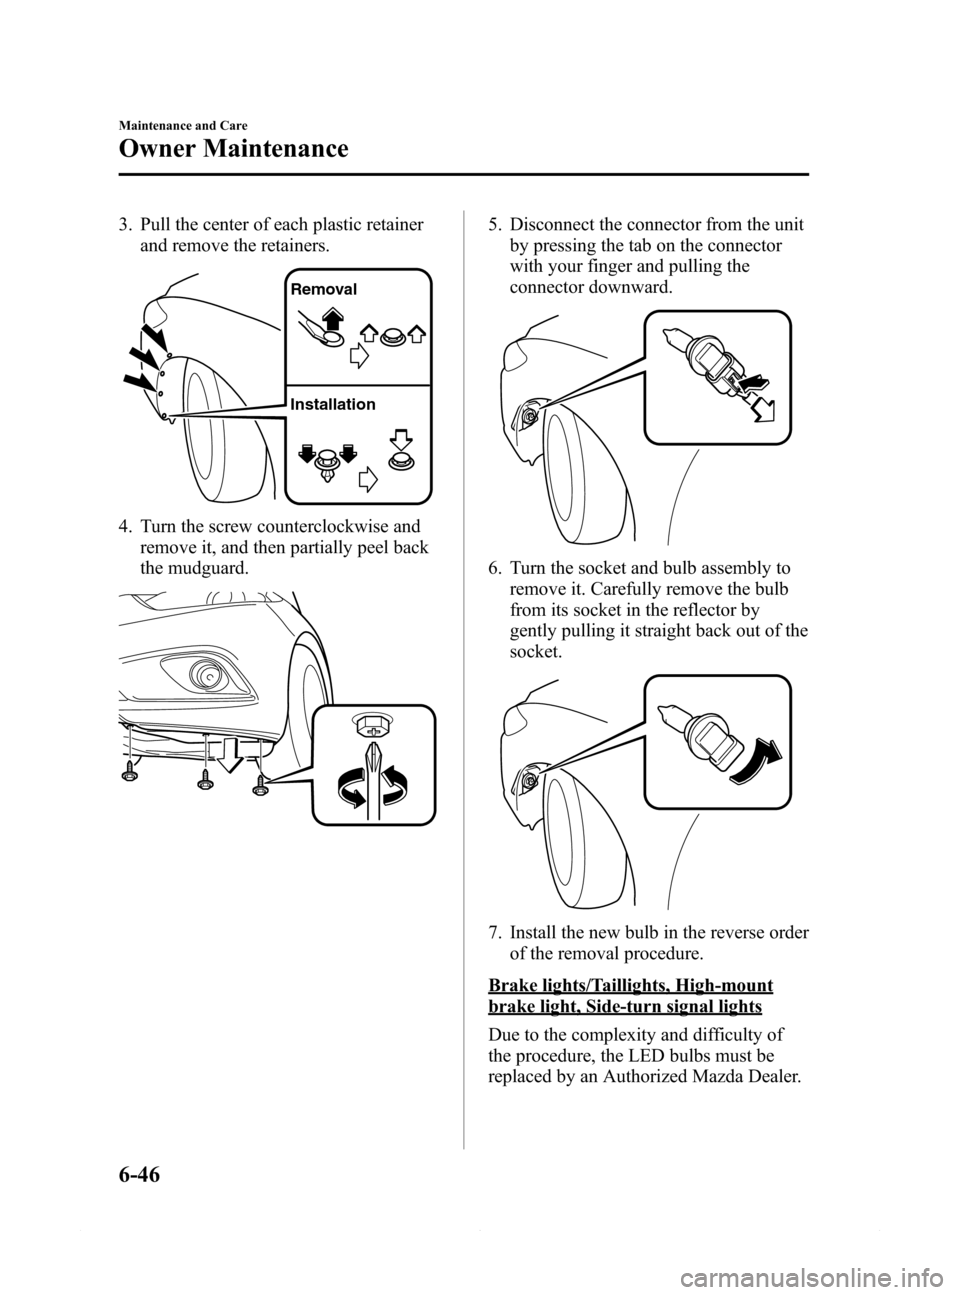 MAZDA MODEL 6 2014  Owners Manual (in English) Black plate (440,1)
3. Pull the center of each plastic retainer
and remove the retainers.
Removal
Installation
4. Turn the screw counterclockwise and
remove it, and then partially peel back
the mudgua